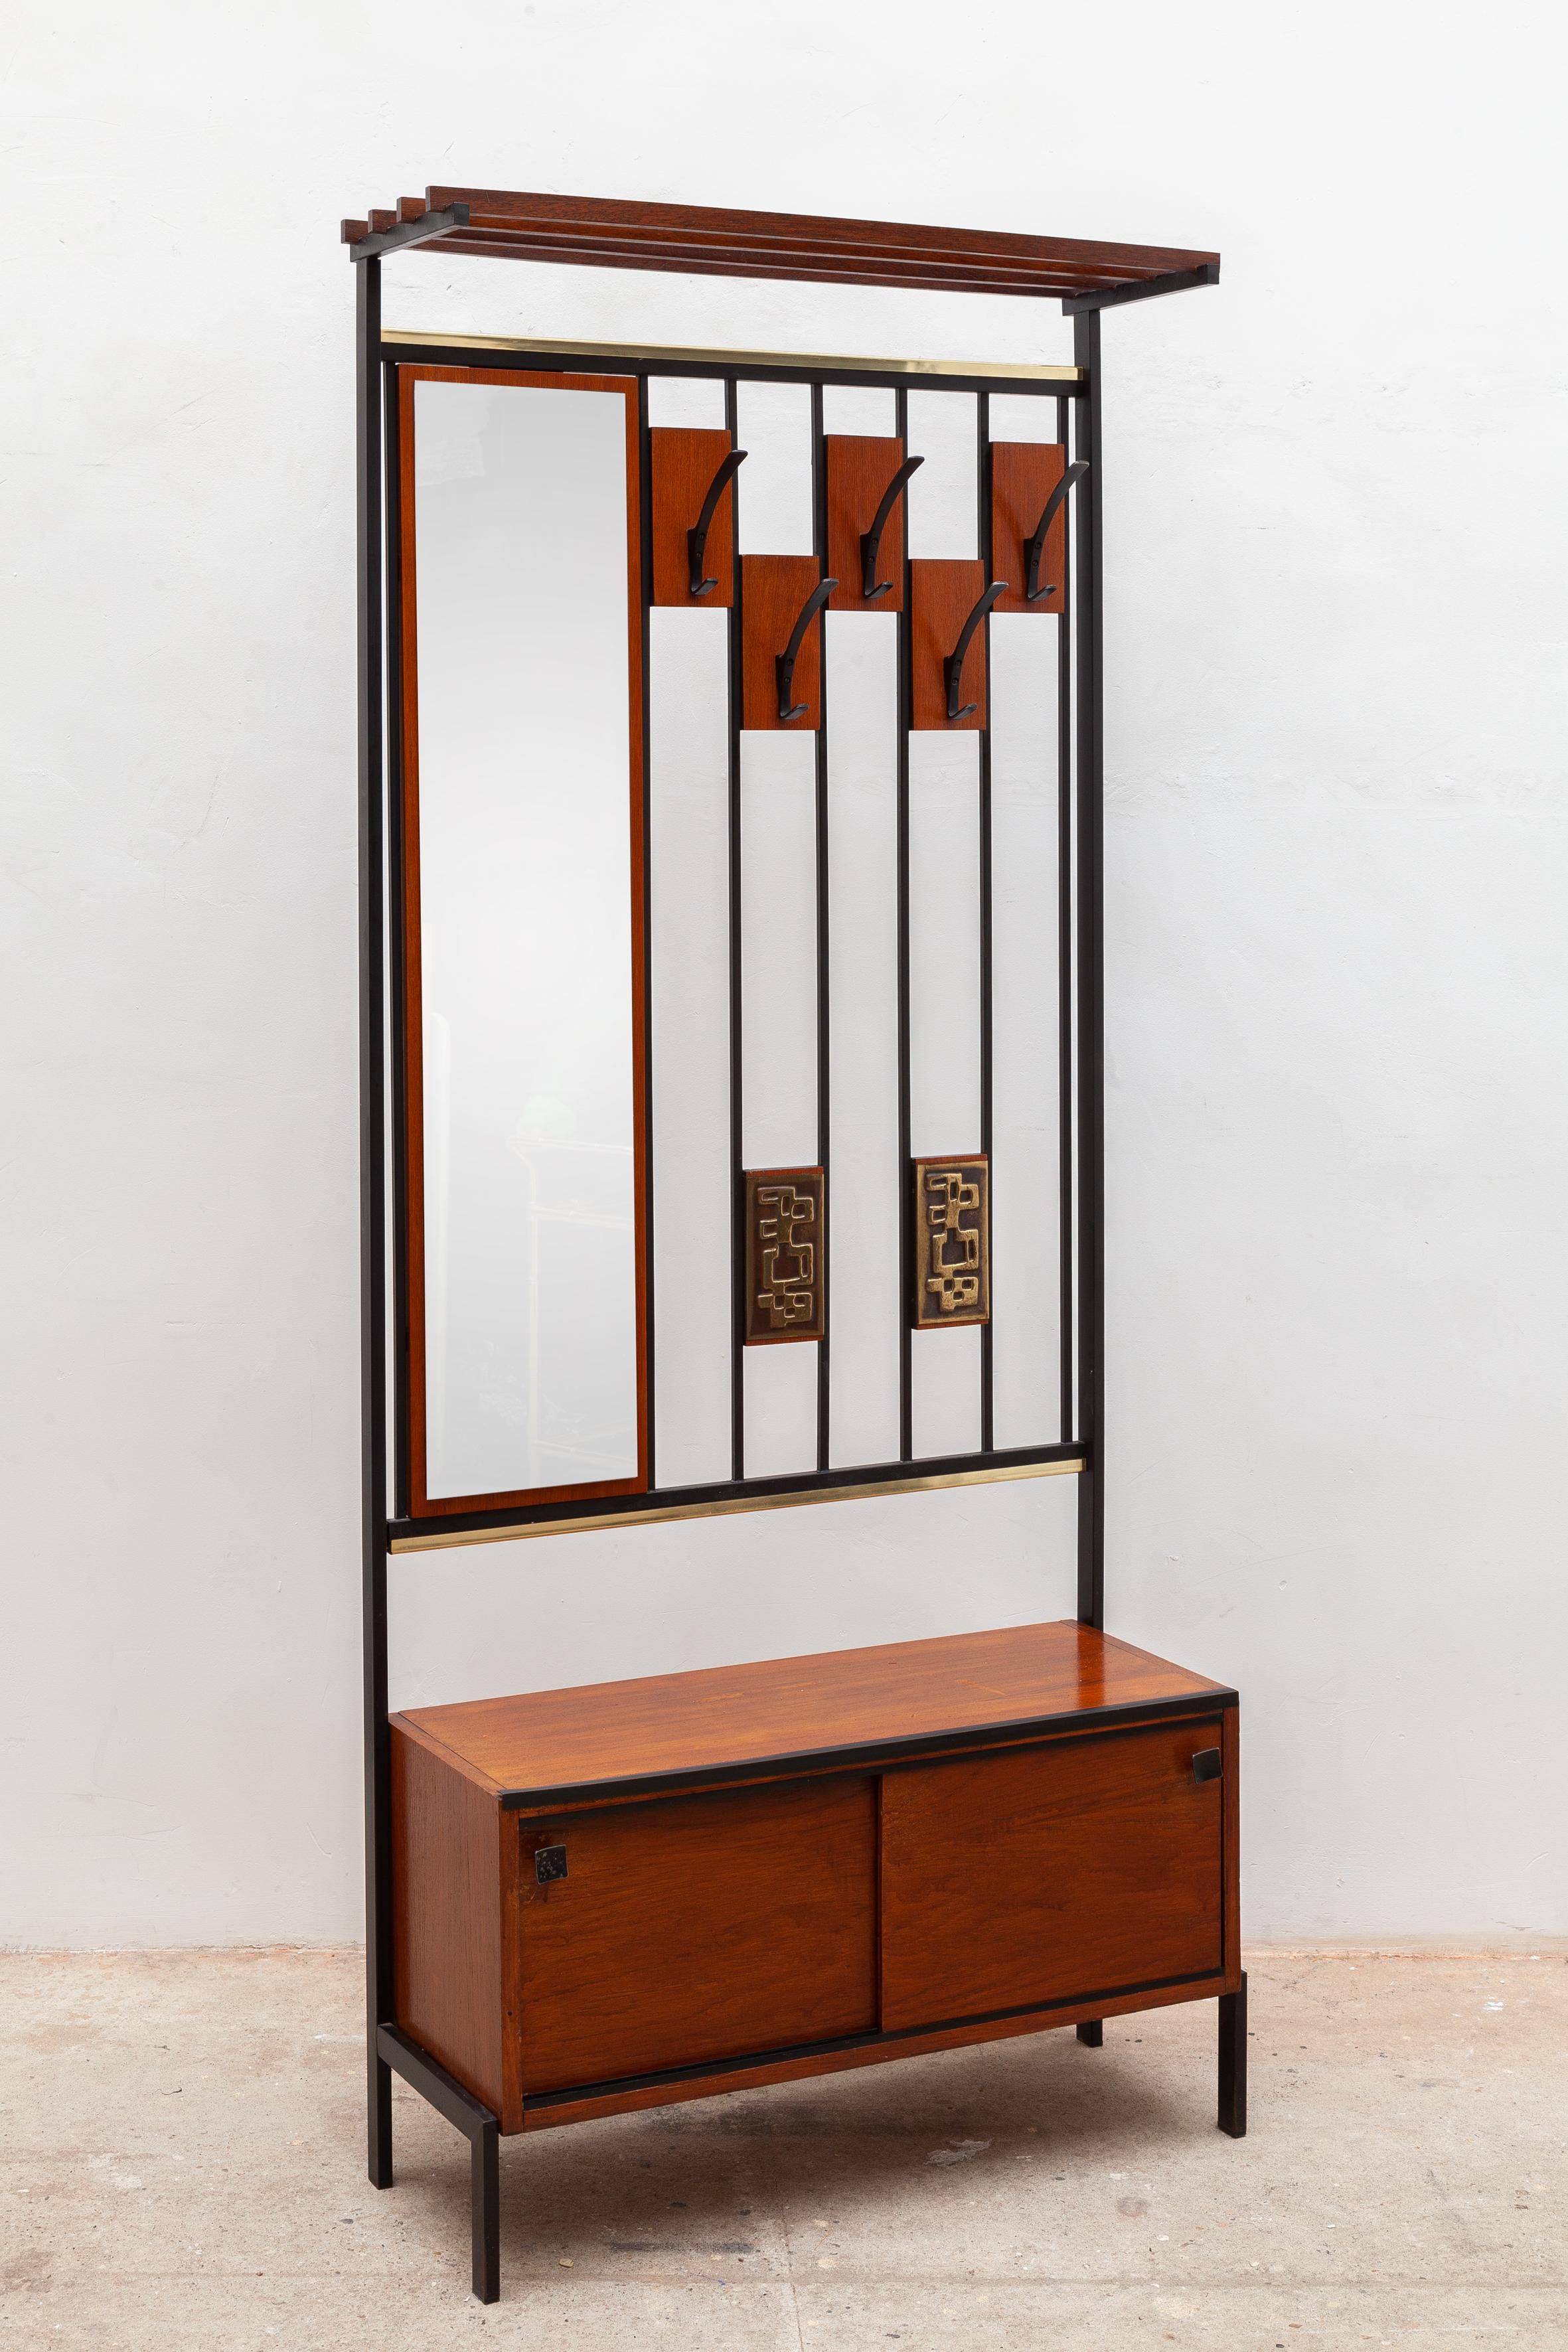 Alfred Hendrickx coat and hat rack. Vintage midcentury coat rack by Hendrickx, Belgium. Comprised of 5 metal black lacquered coat hooks, a hat rack, mirror, and shoe cabinet with sliding drawers. Made of teak with iron frame and artful metal, bronze